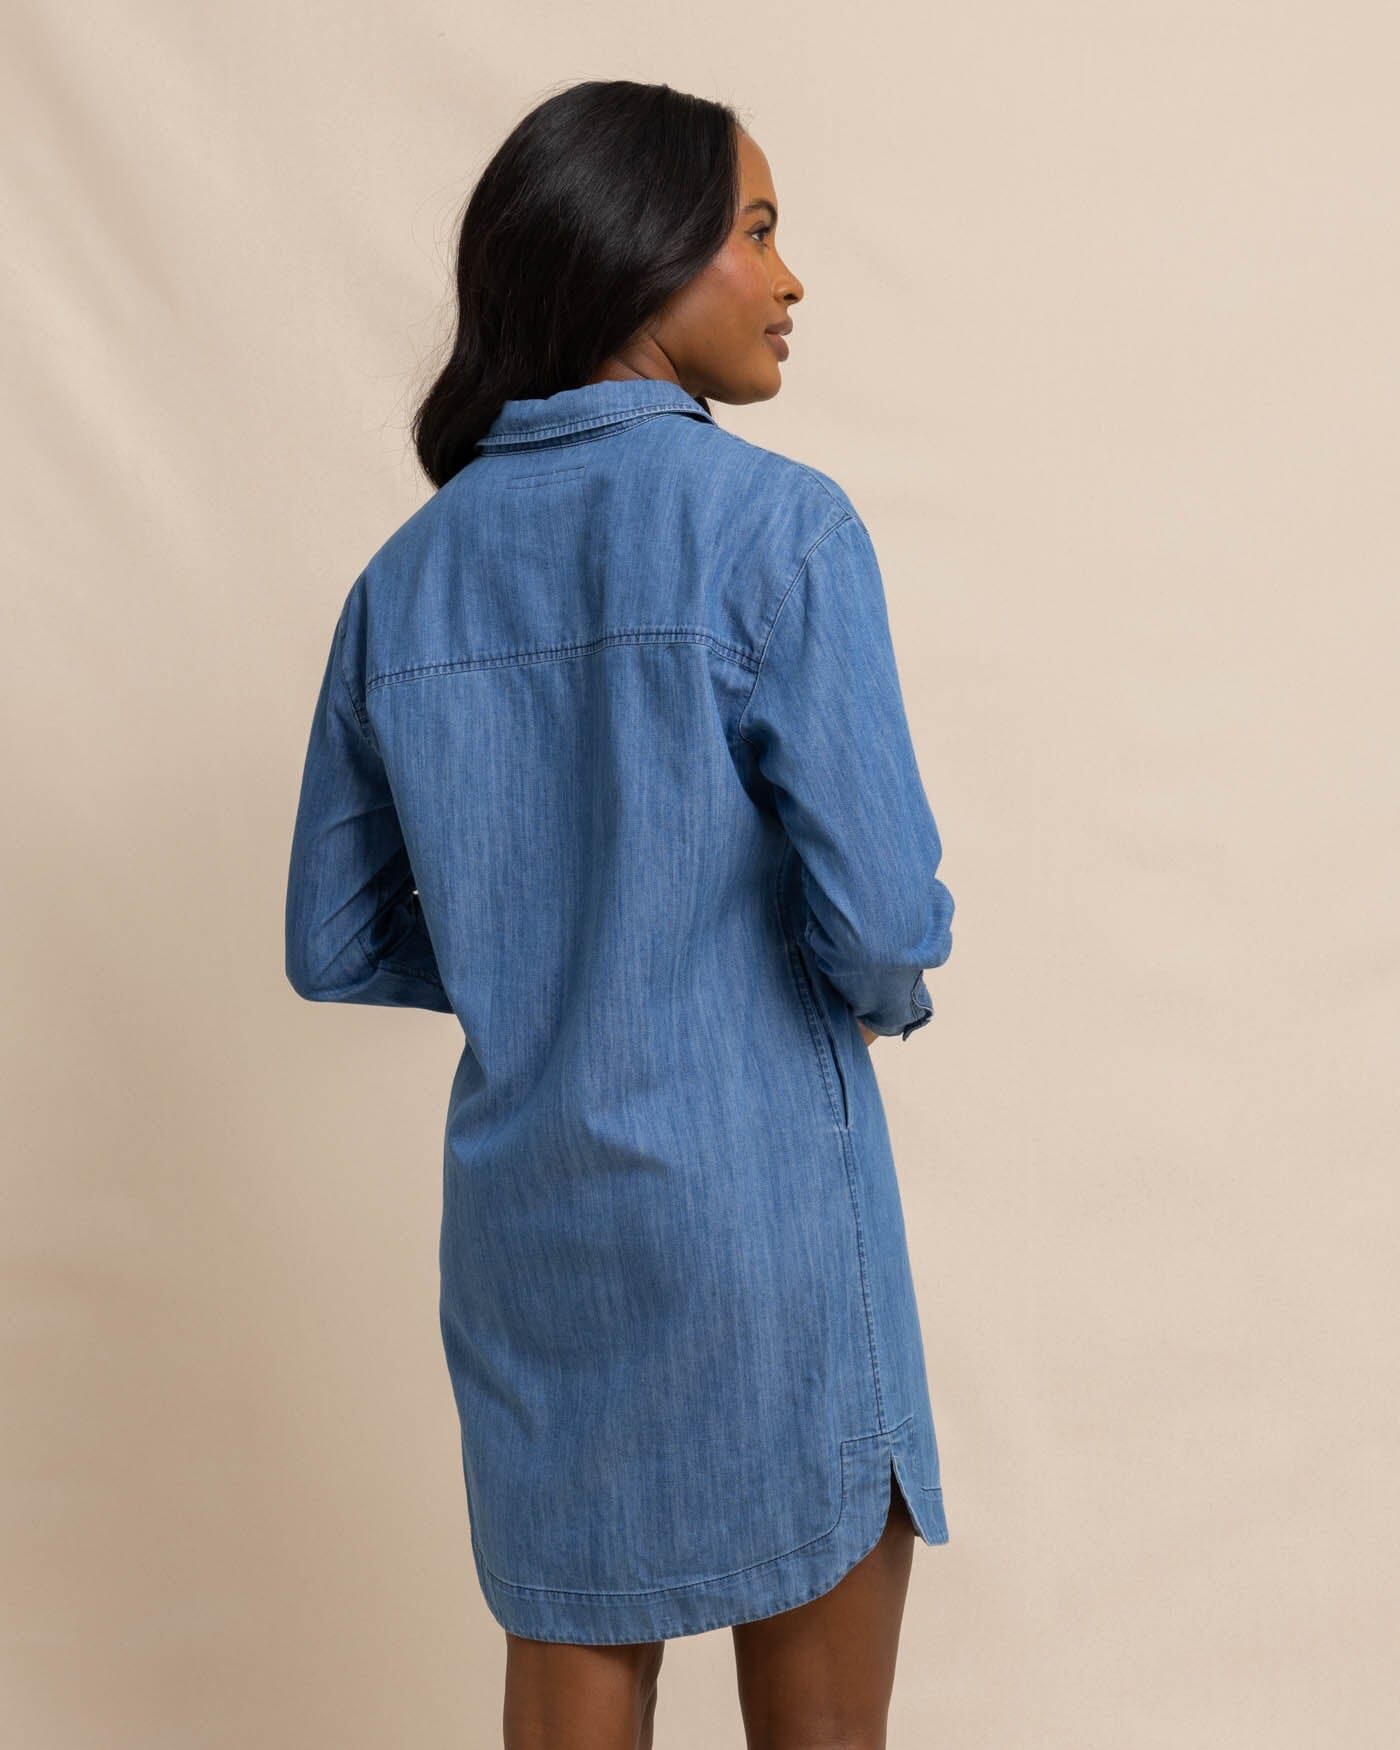 Womens Denim Shirt Dresses Long Sleeve Vintage Distressed Button Down  Casual Jean Dress with Pockets B-Dark Blue S at Amazon Women's Clothing  store